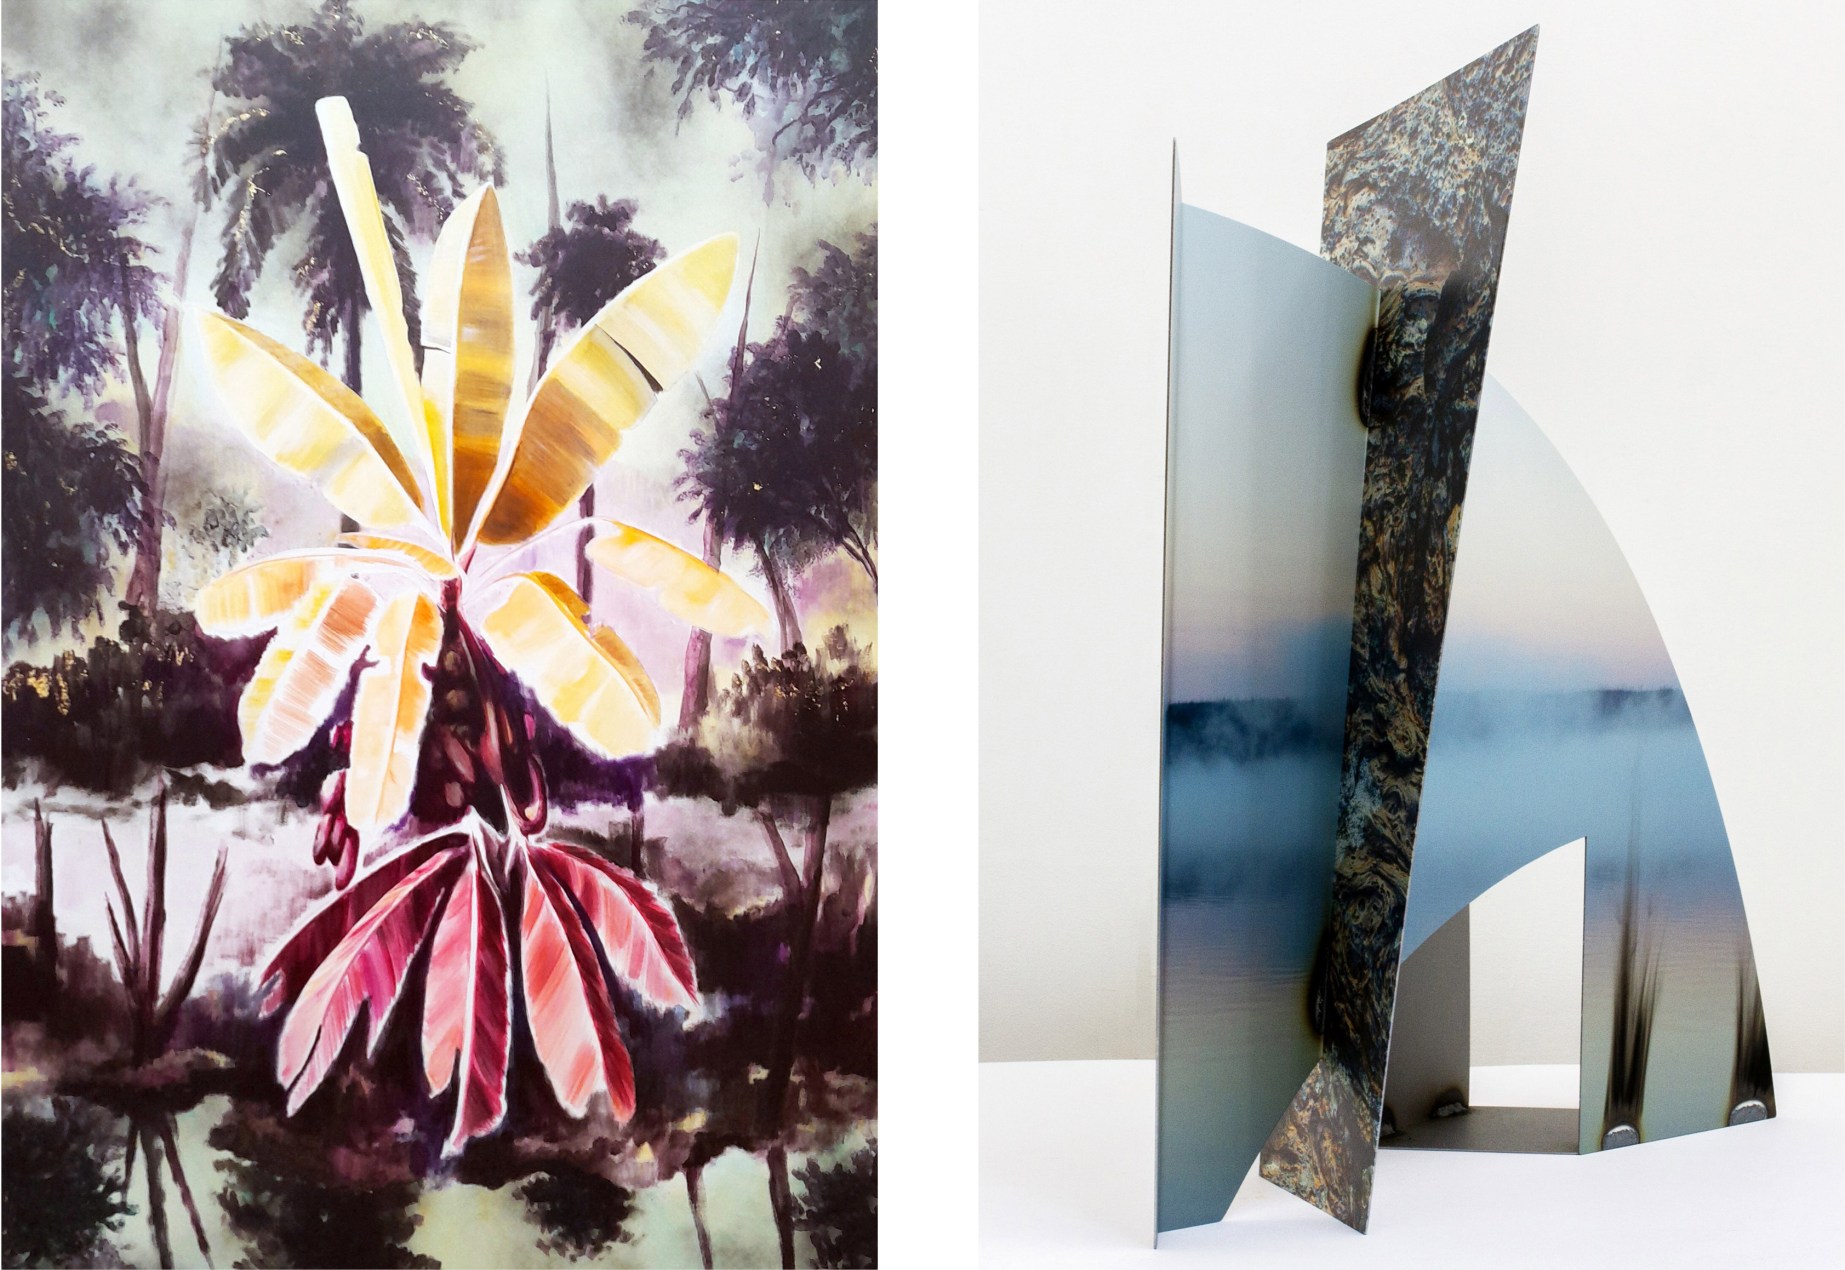 two side by two artworks. on the left painting of large yellow and ochre palm tree leaves in front of a dark and stormy tropical background in which palm trees are reflected over a body of water. on the right, a sculpture composed on interlocking, geometric steel sheets printed with digital images of lava and a sunrise.  